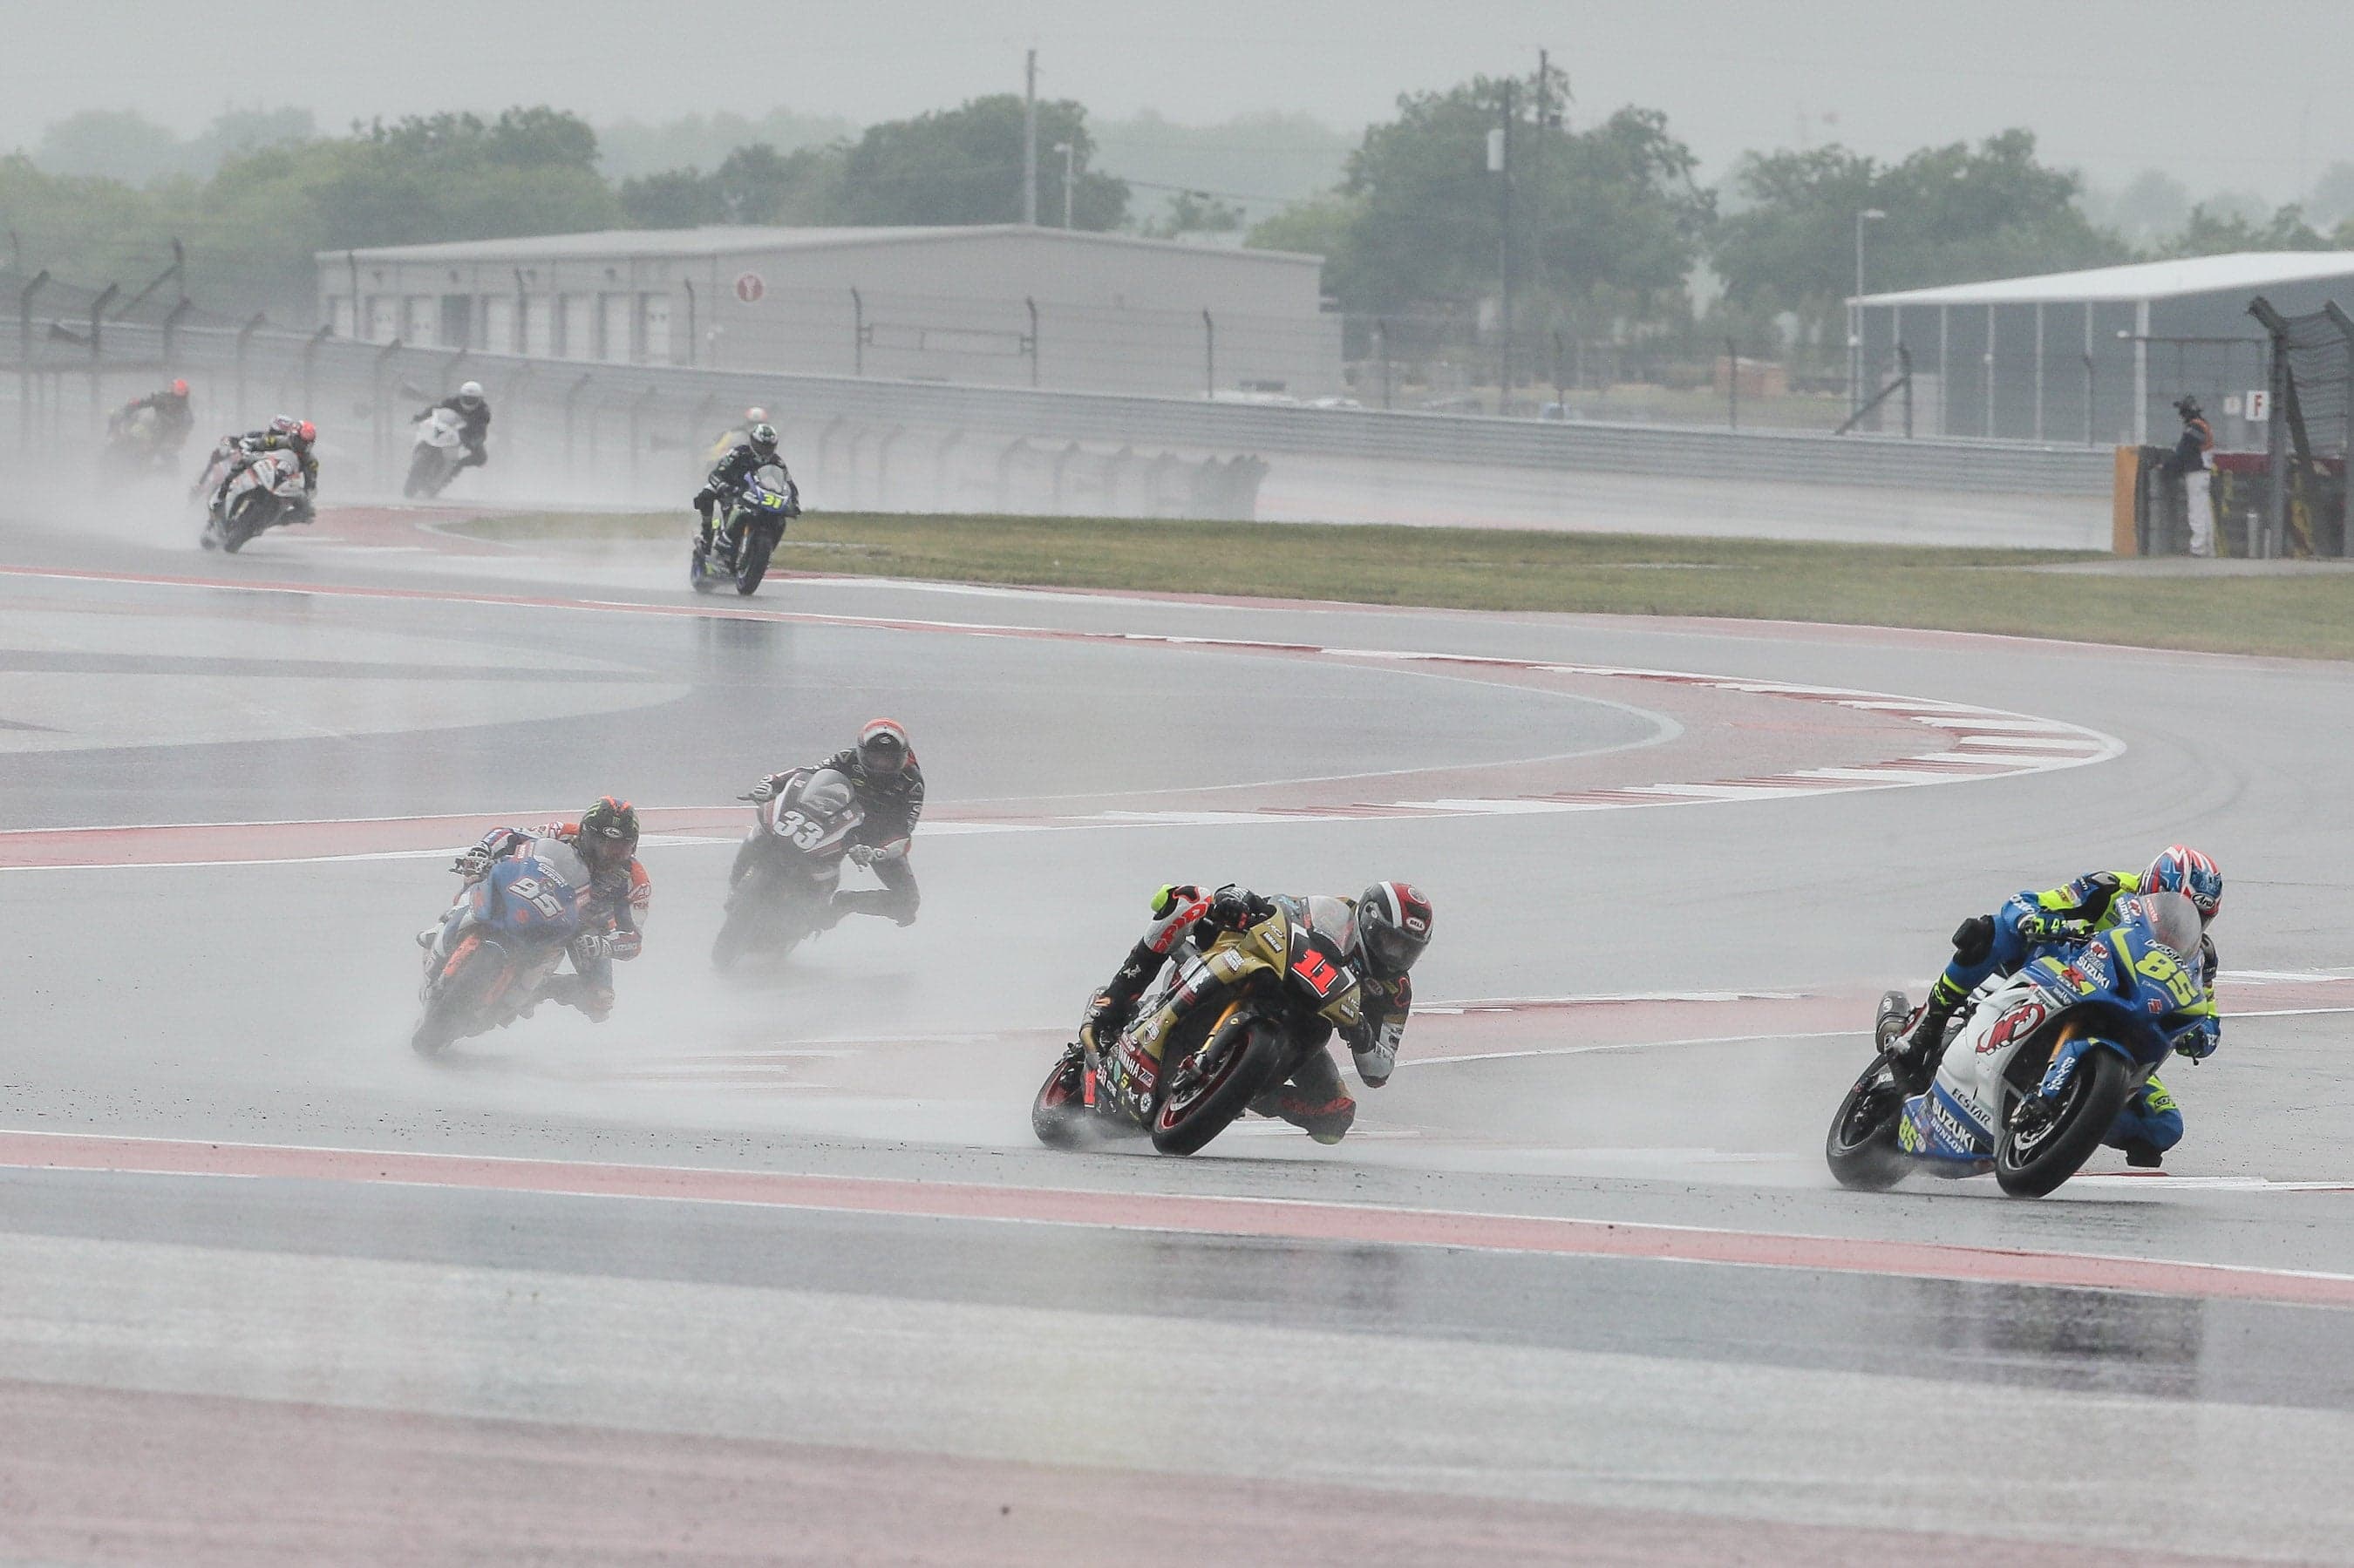 MotoAmerica Superbike at Circuit of the Americas Winners are Scholtz and Elias